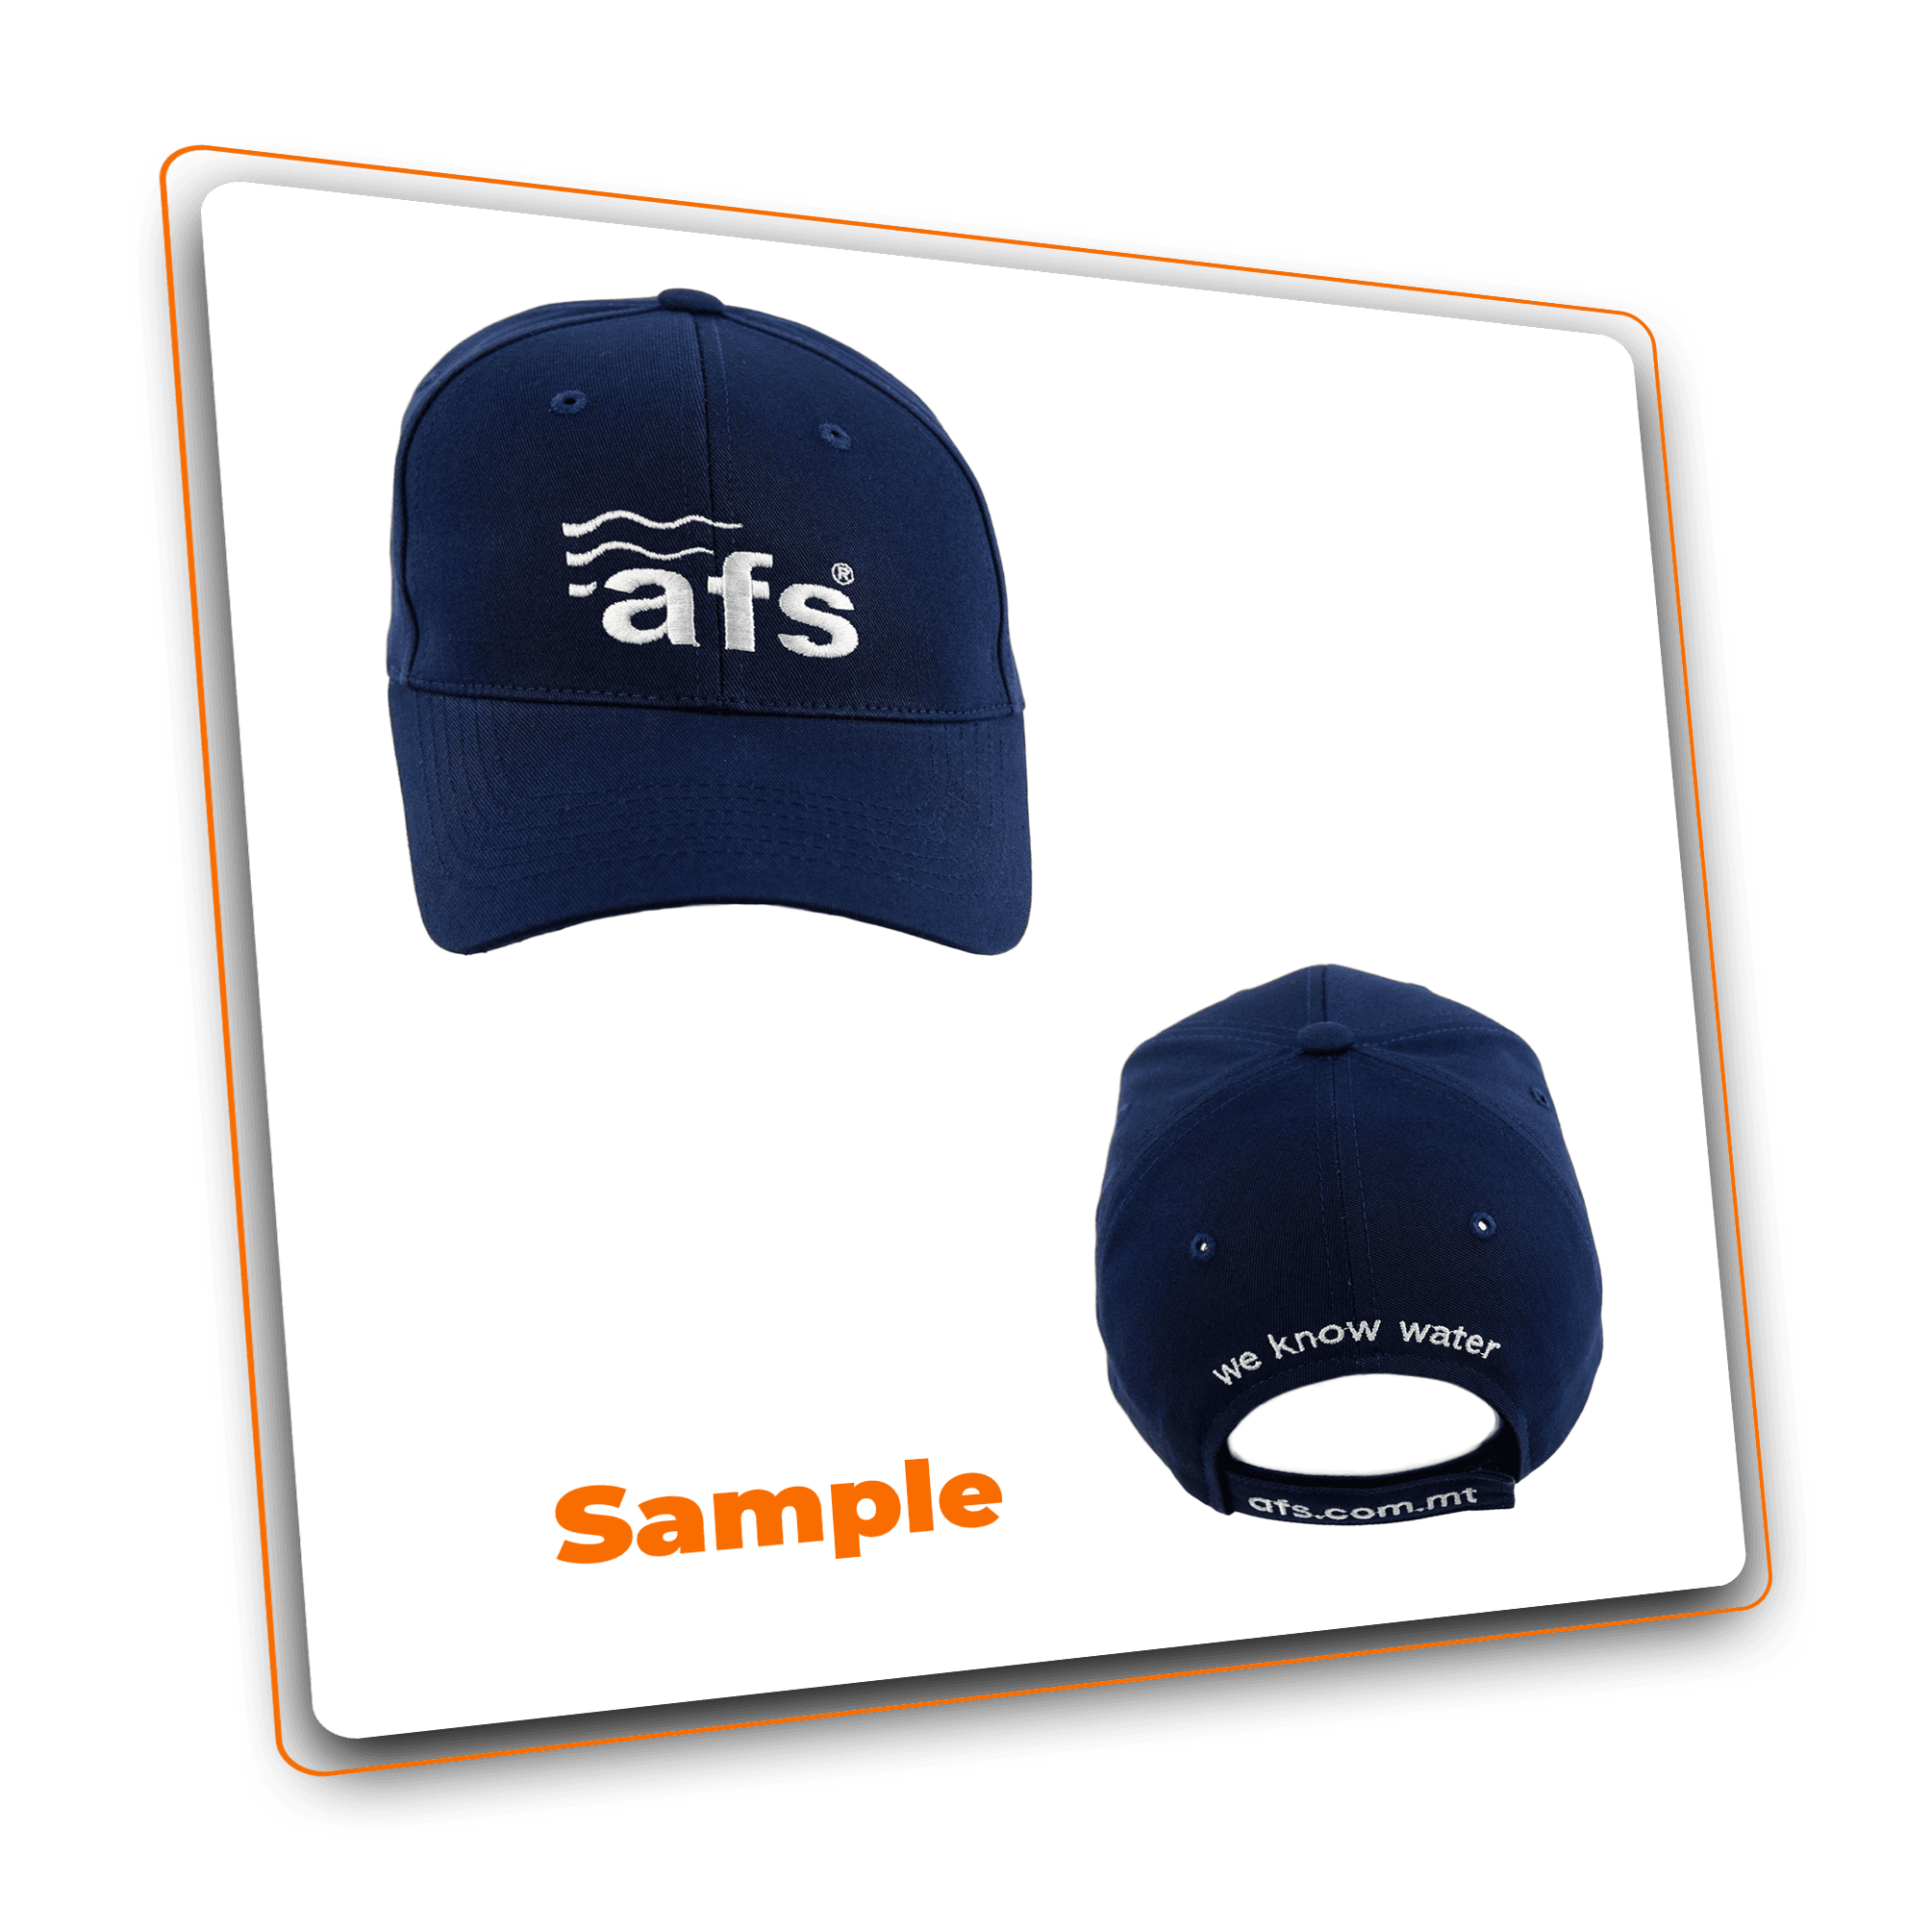 https://hatstores3.s3.amazonaws.com/images/file_2024-02-16wrz.png